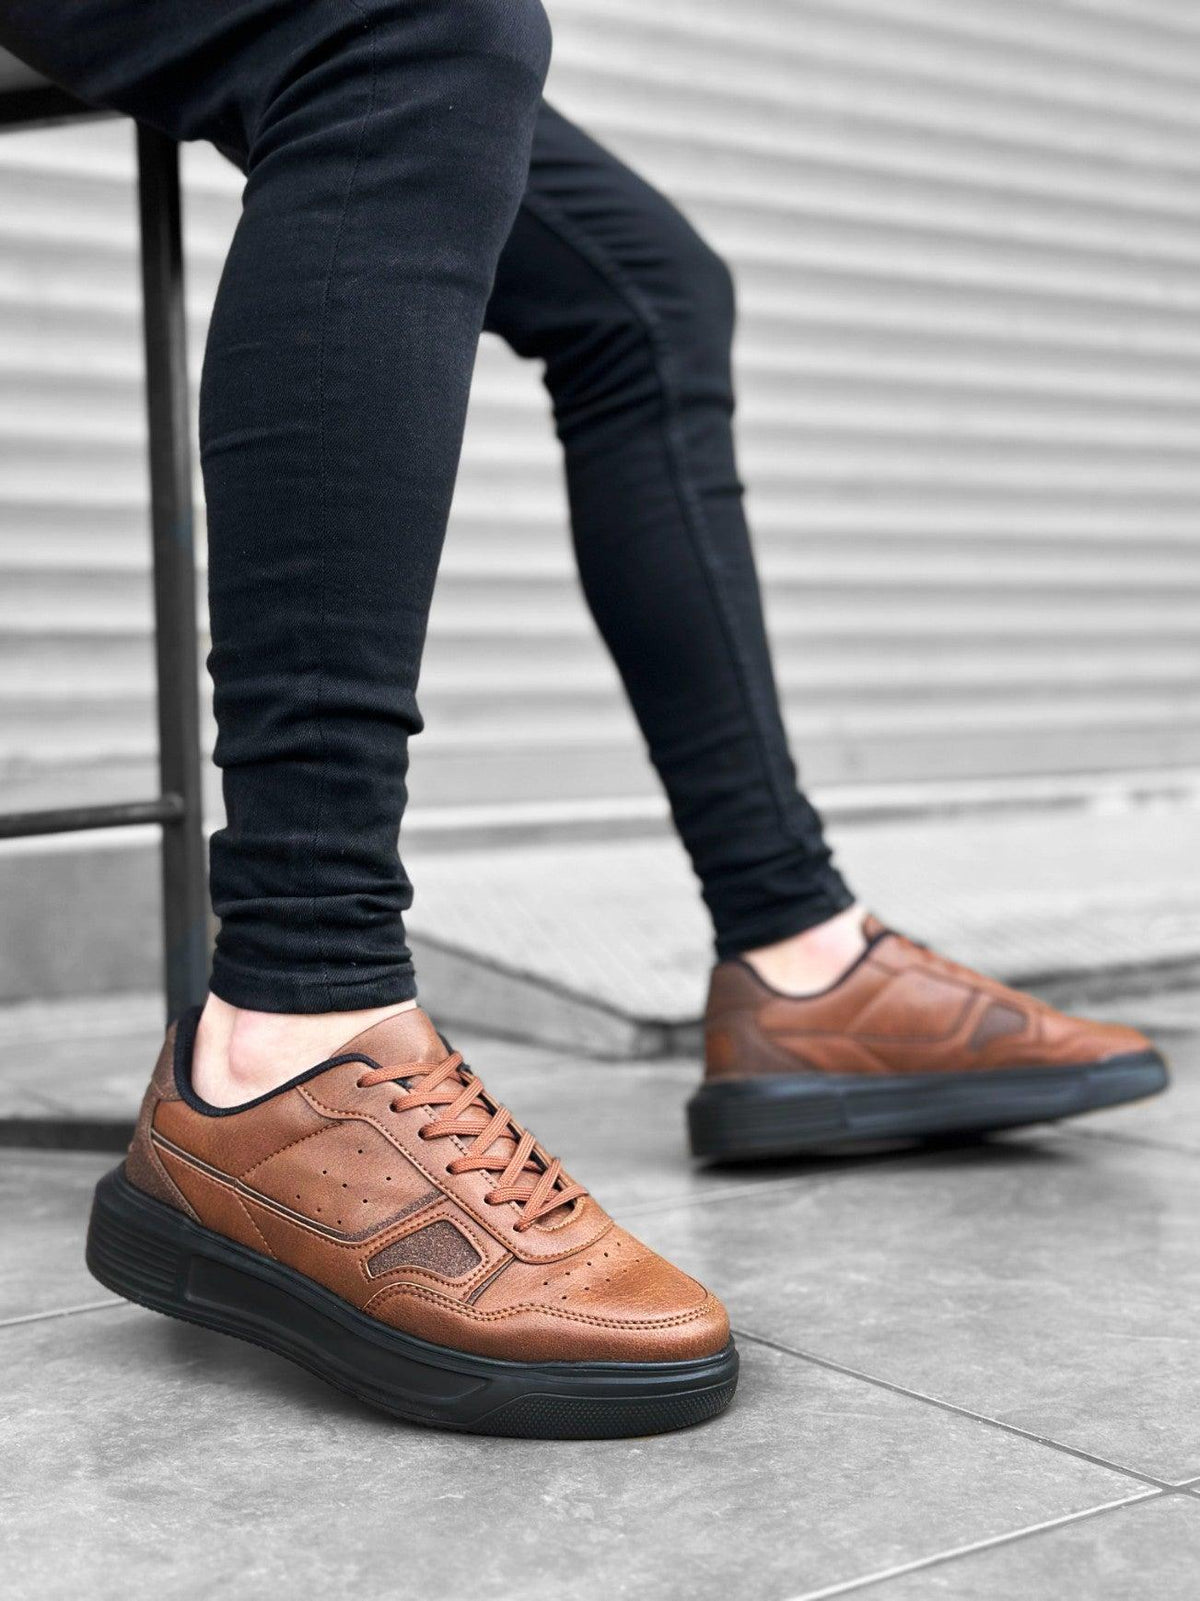 BA0221 BOA Thick High Sole Lace-Up Tan Black Men's Sneakers Shoes - STREET MODE ™